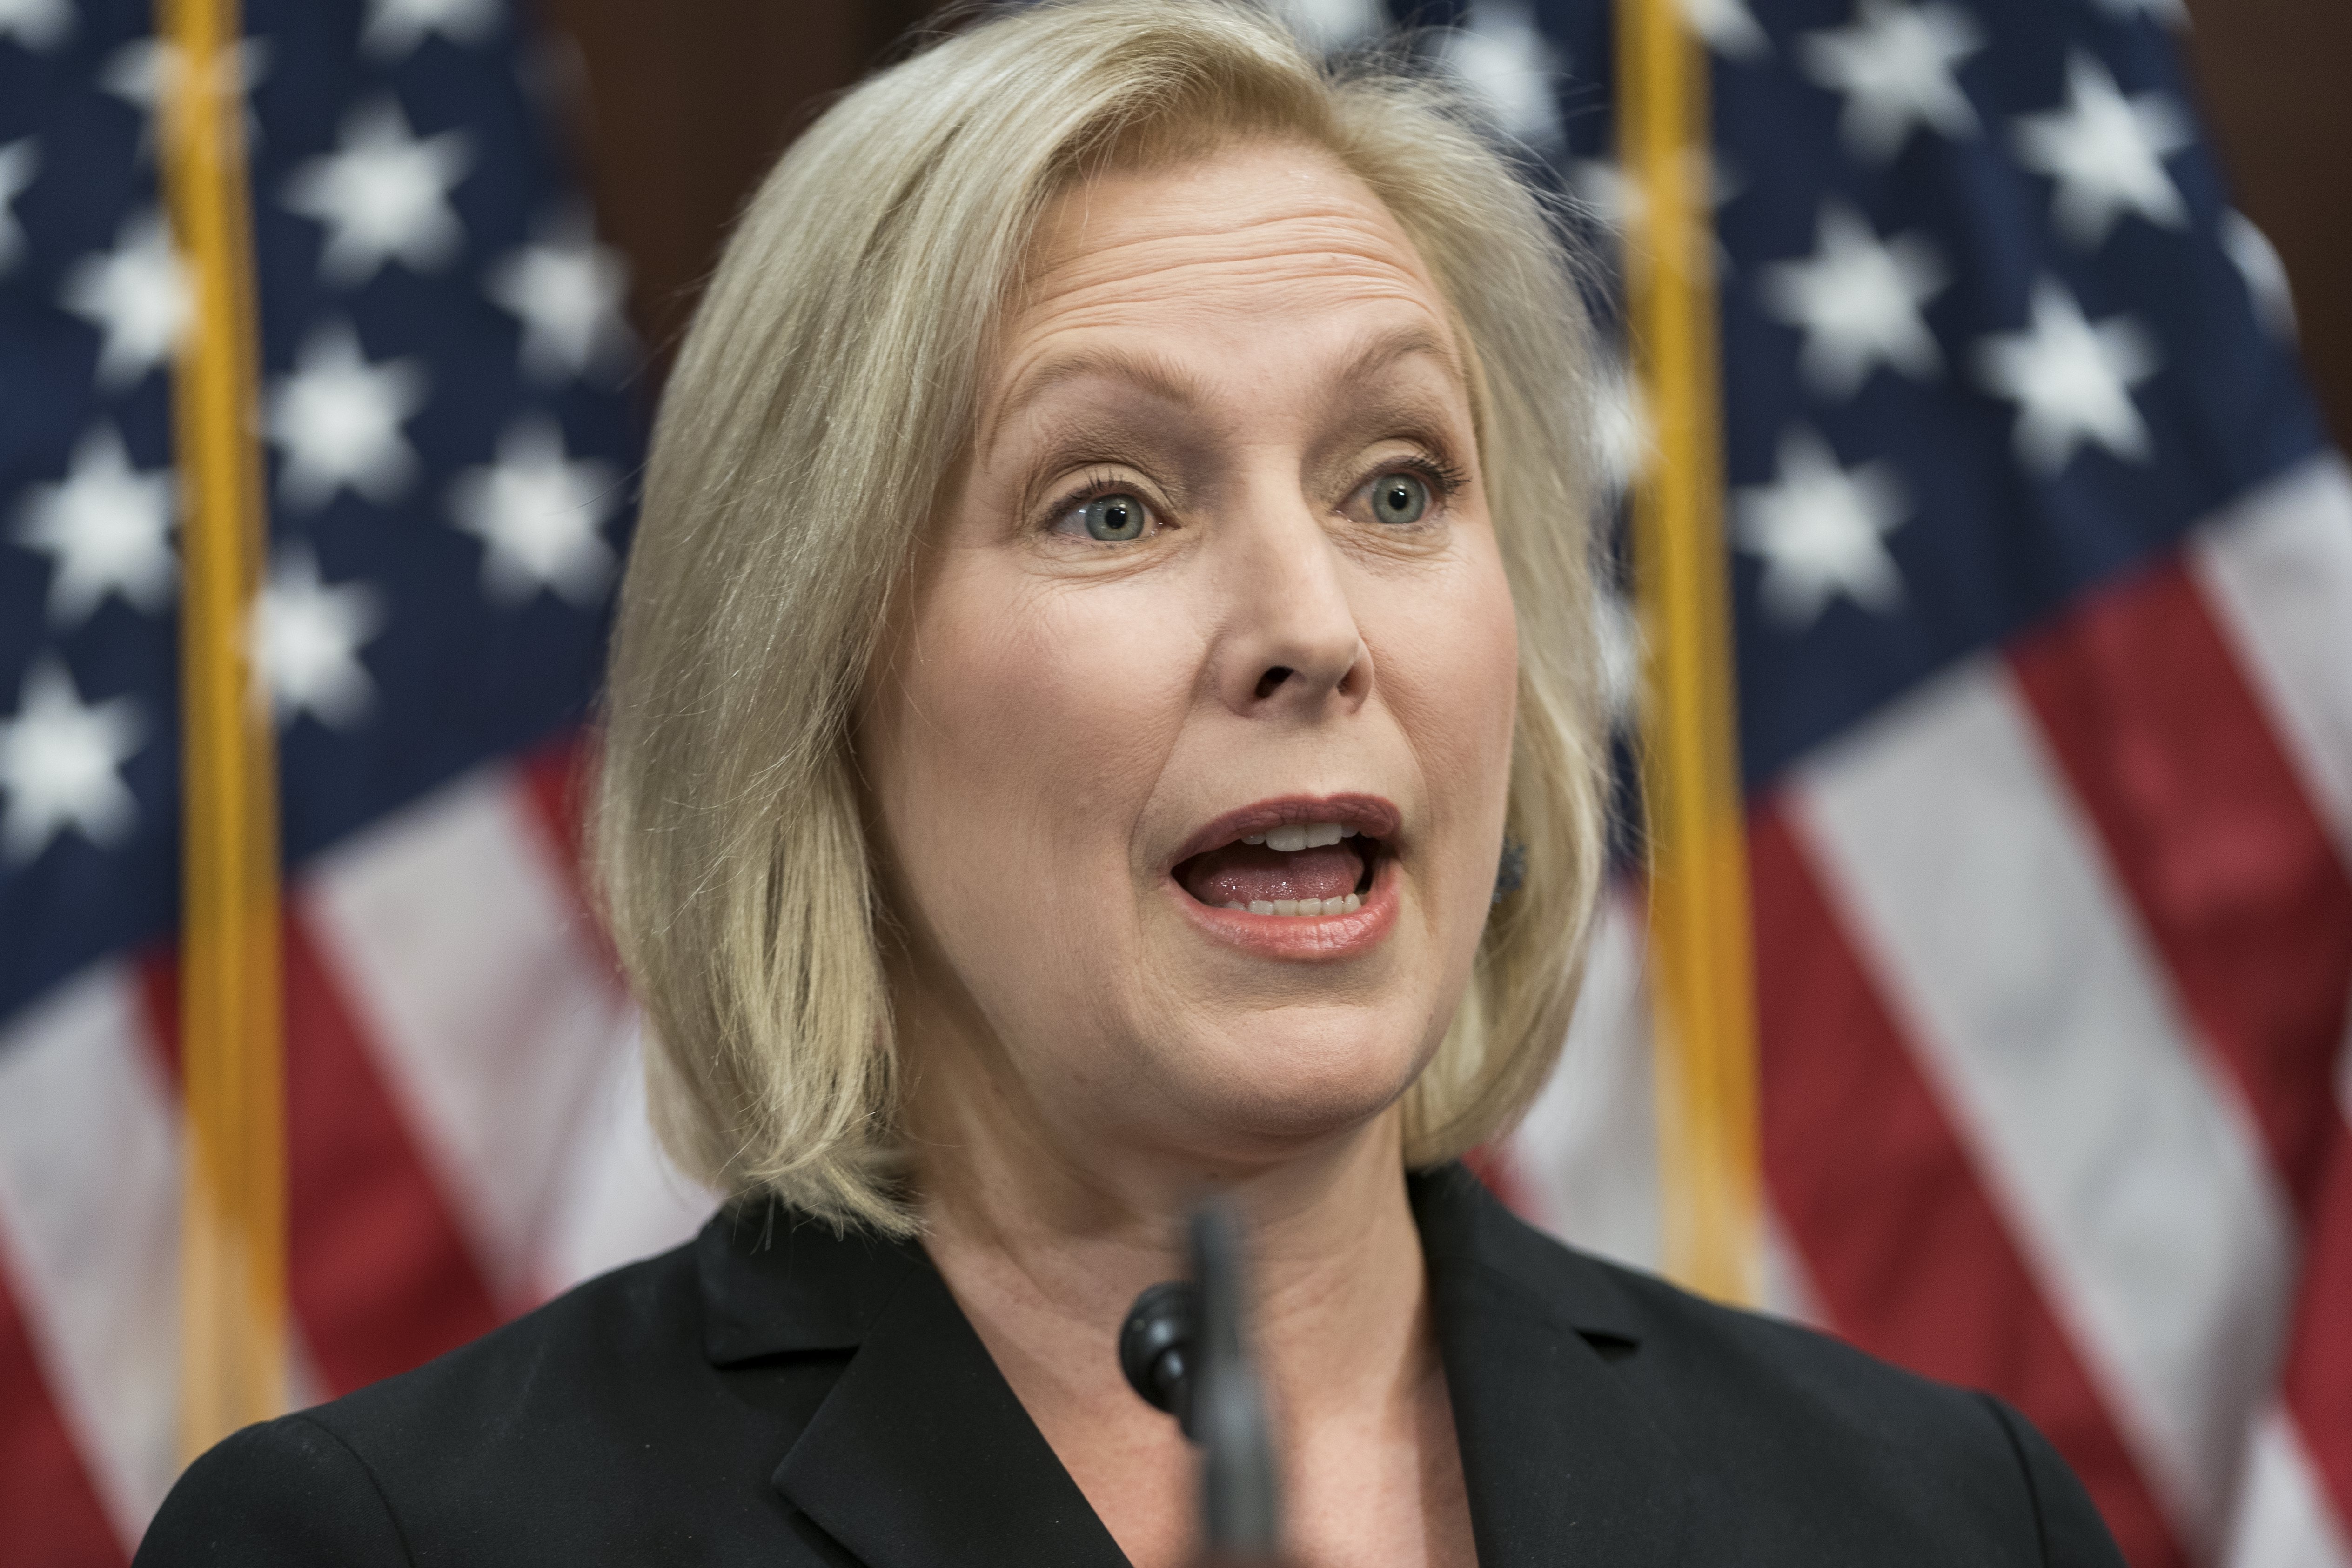 Democratic Senator from New York, Kirsten Gillibrand, speaks about President Trump's sexually suggestive tweet about her in the US Capitol in Washington,